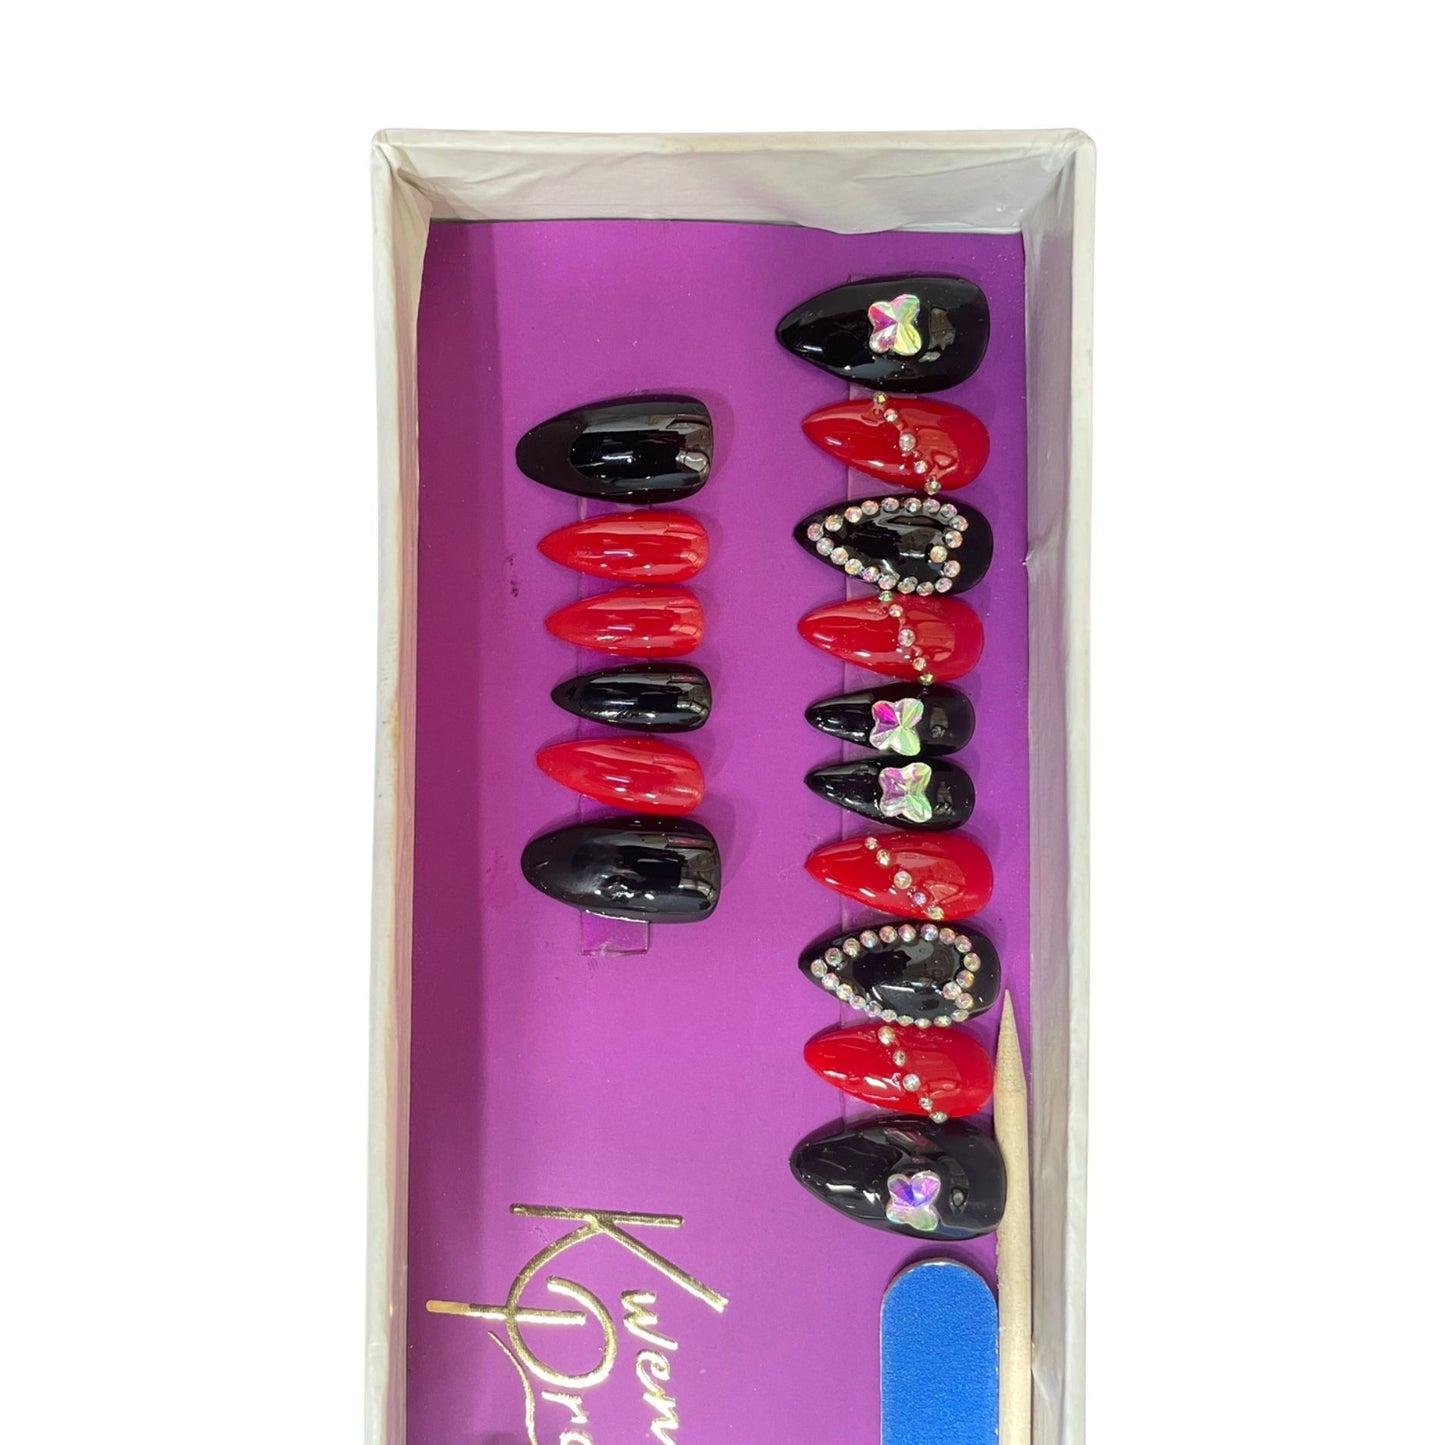 Kwen Pro Gorgeous Nail Extension Black AND Red with Heart Design Color.